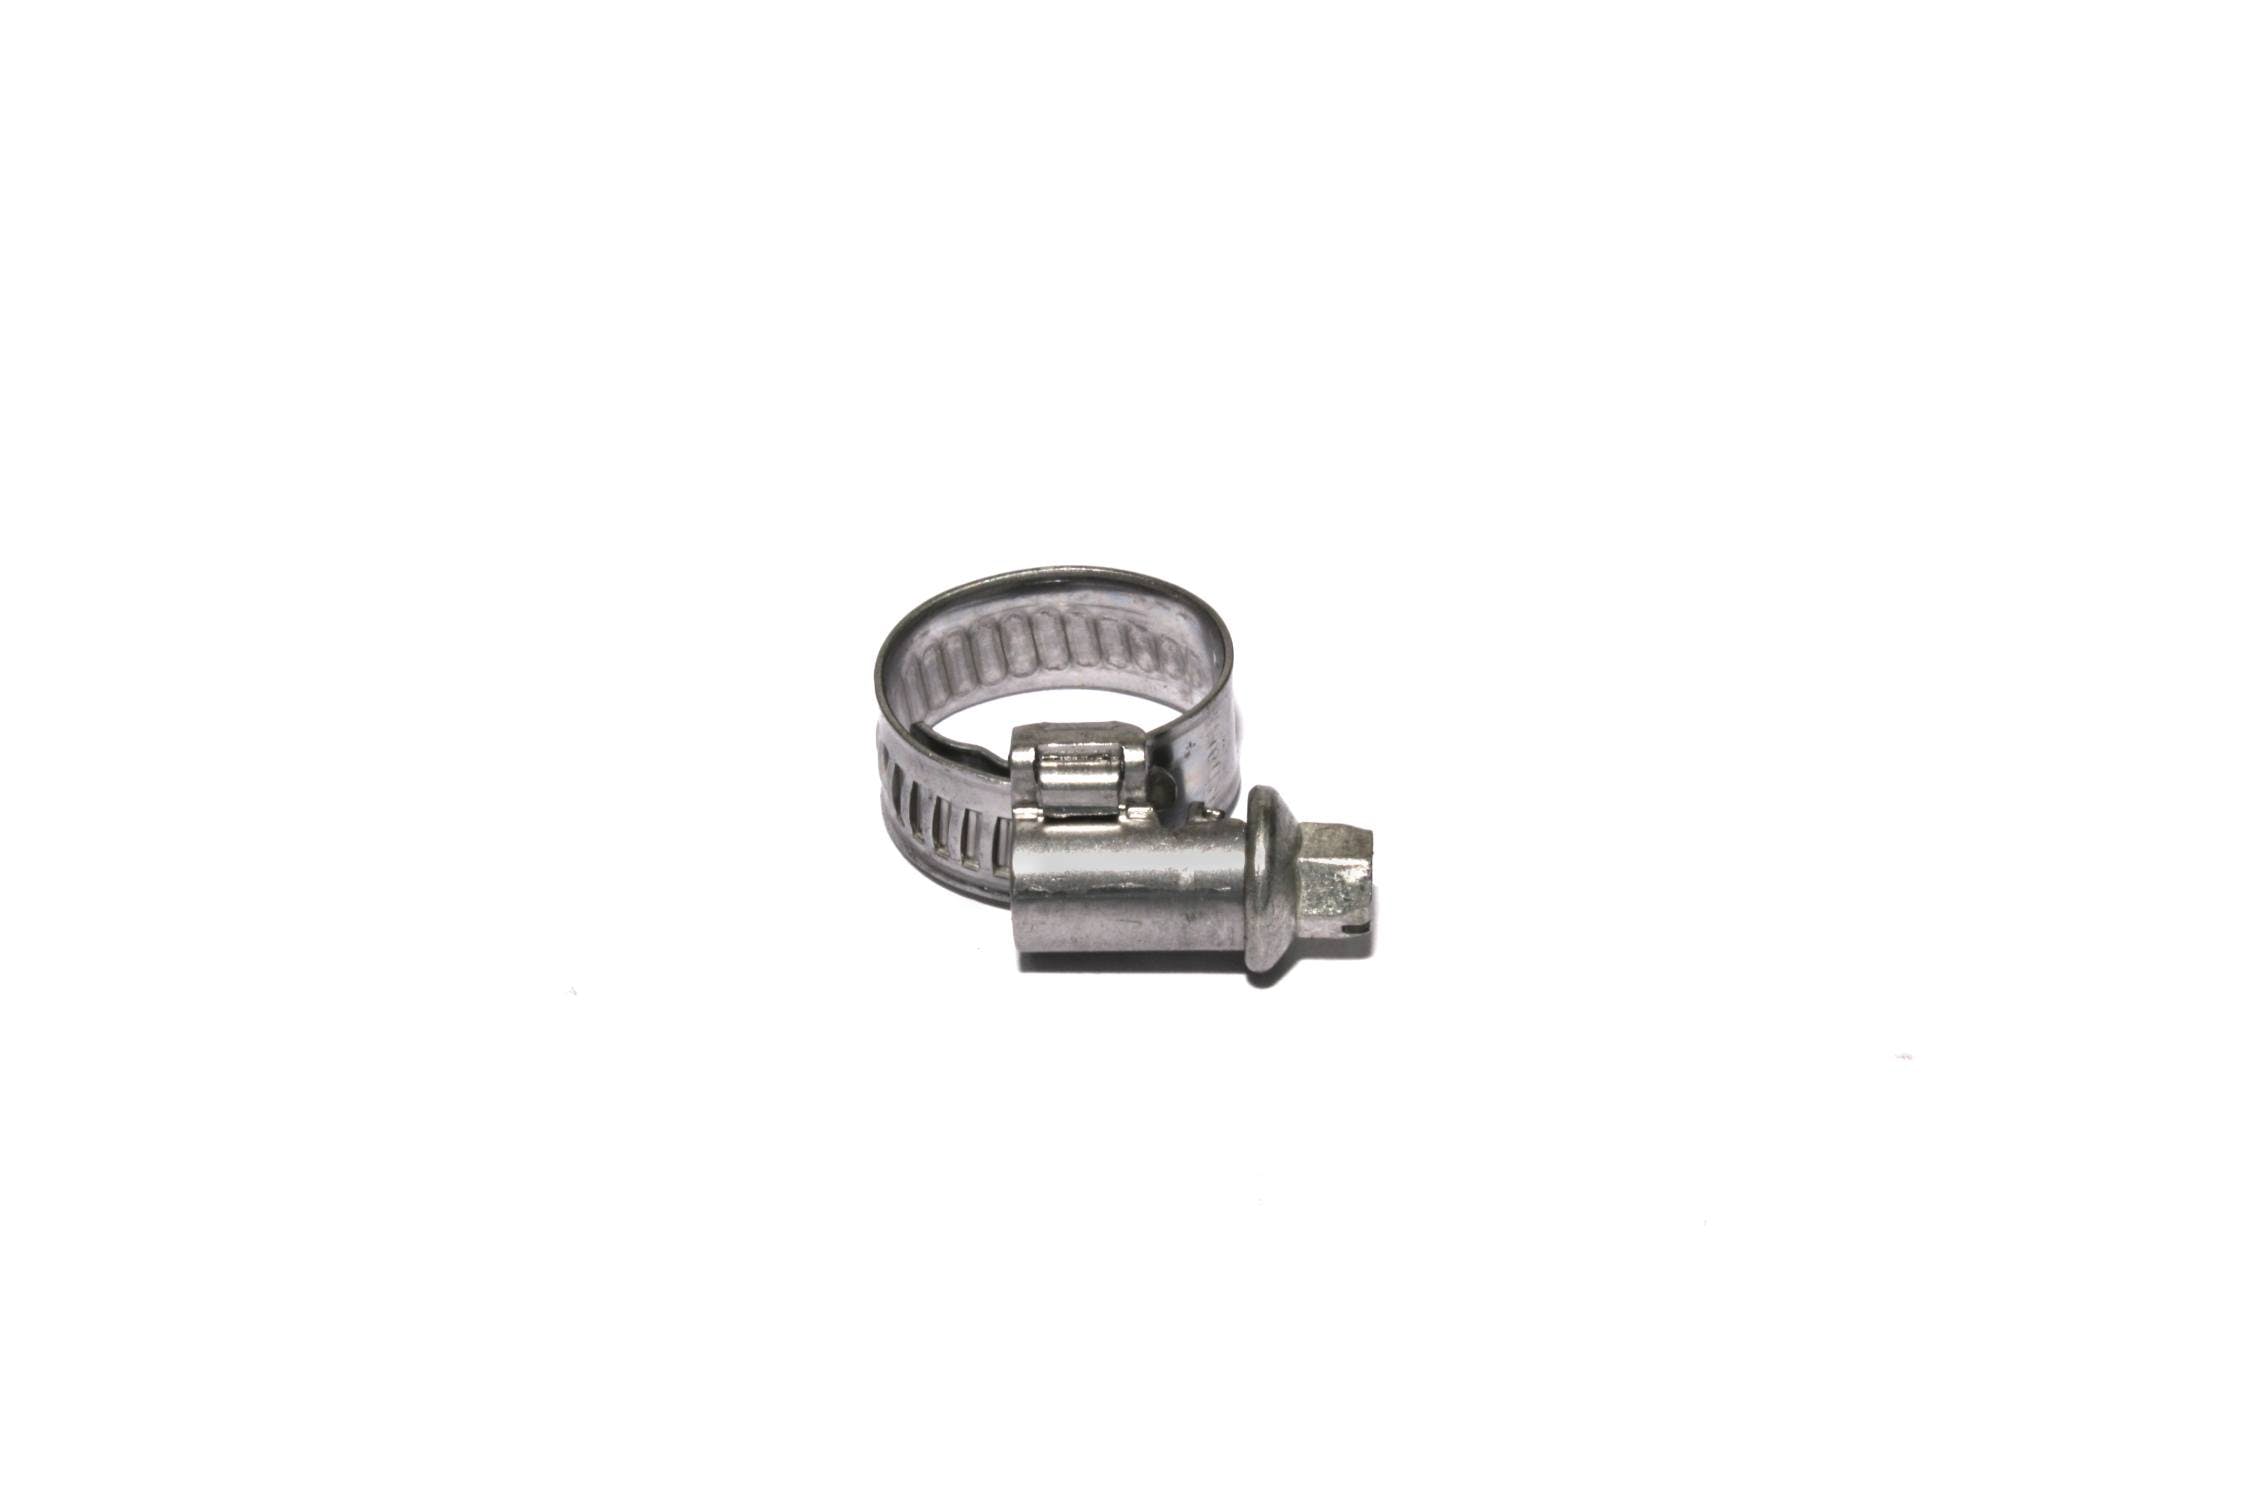 Competition Cams G3758-25 Gator Brand Performance Hose Clamps